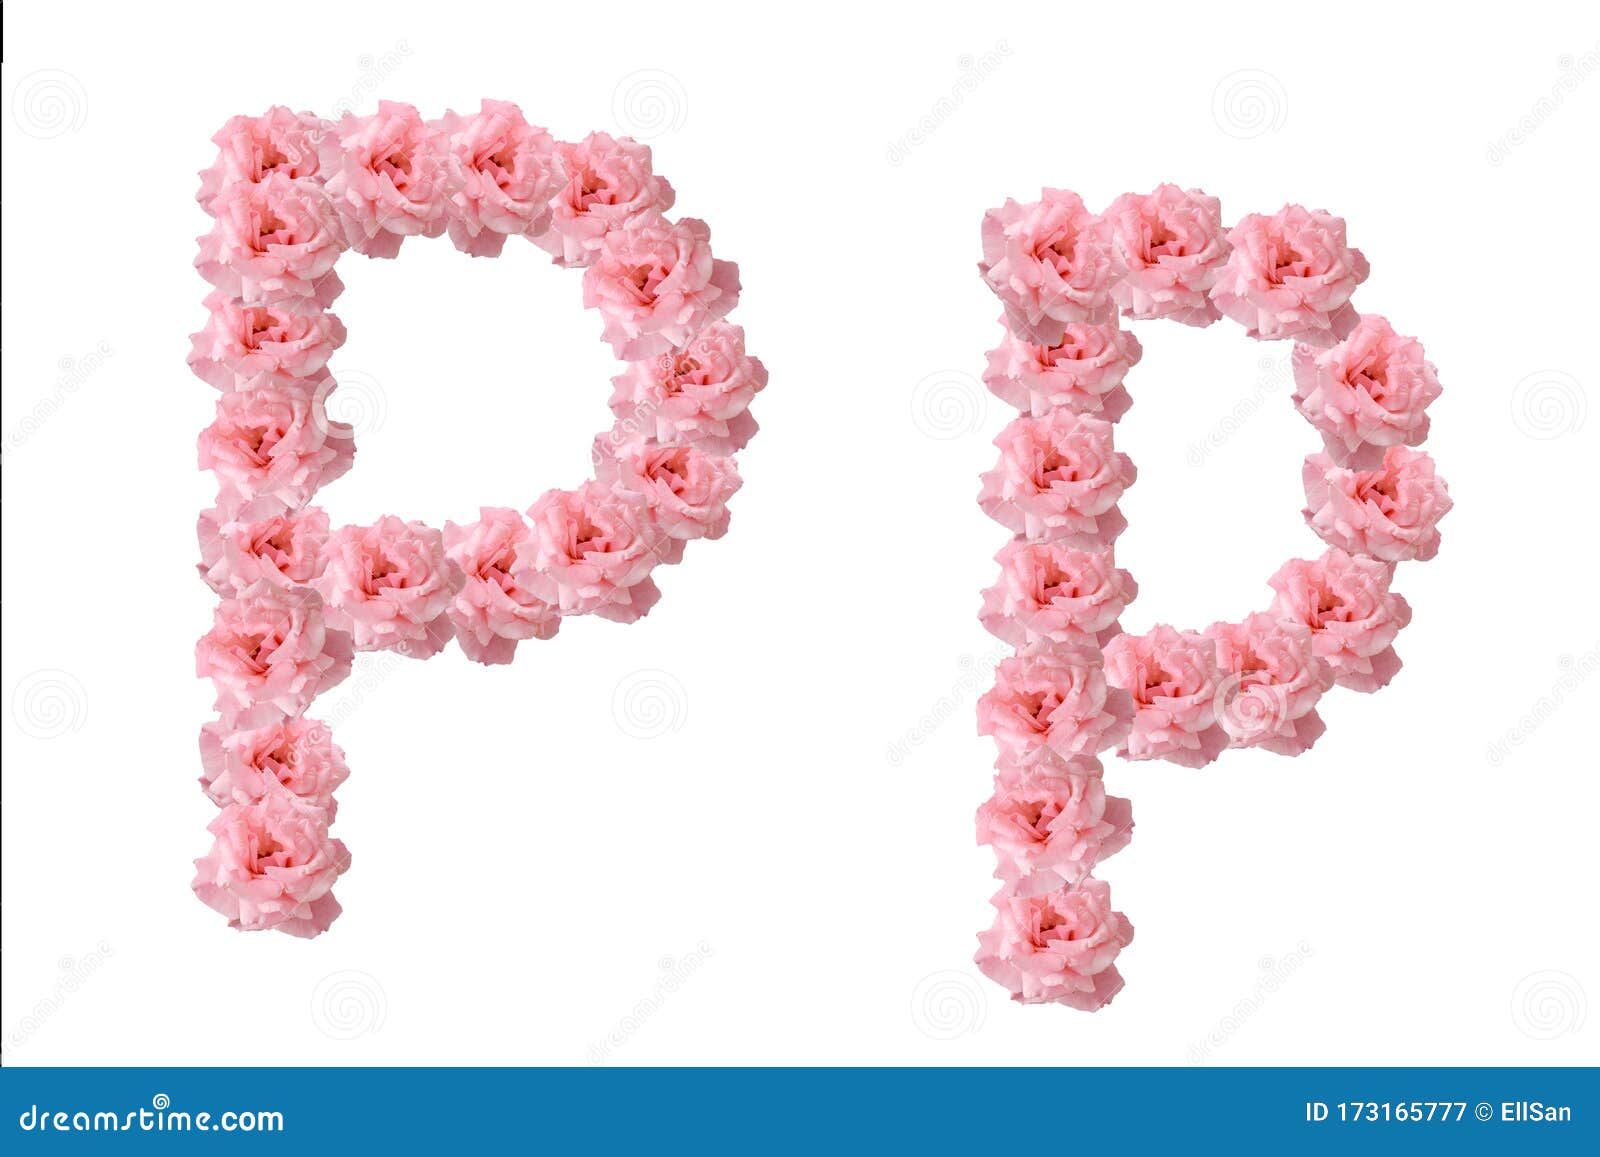 English Alphabet from Flowers of Pink Roses, Letter P Stock Image ...